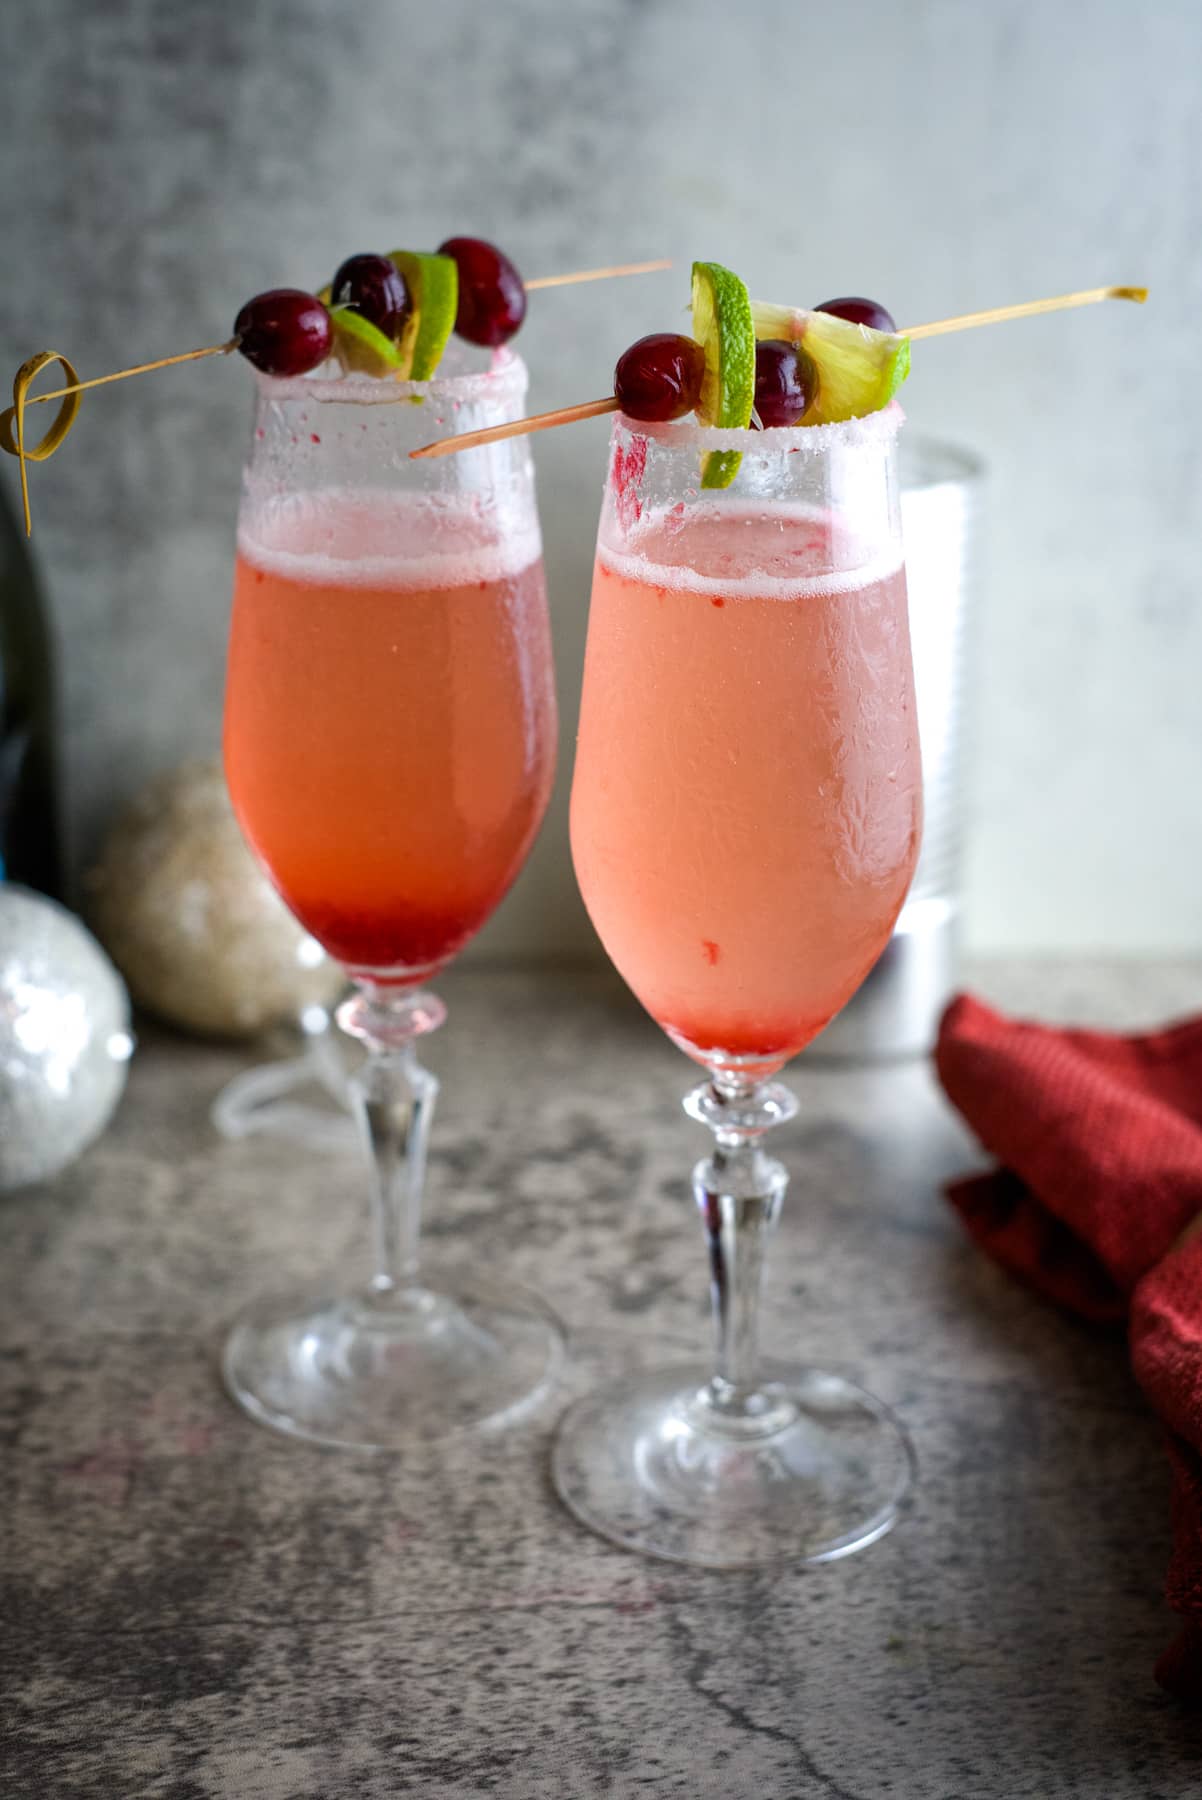 Two glasses of cranberry cocktail served with garnishes, resembling a cranberry mimosa.